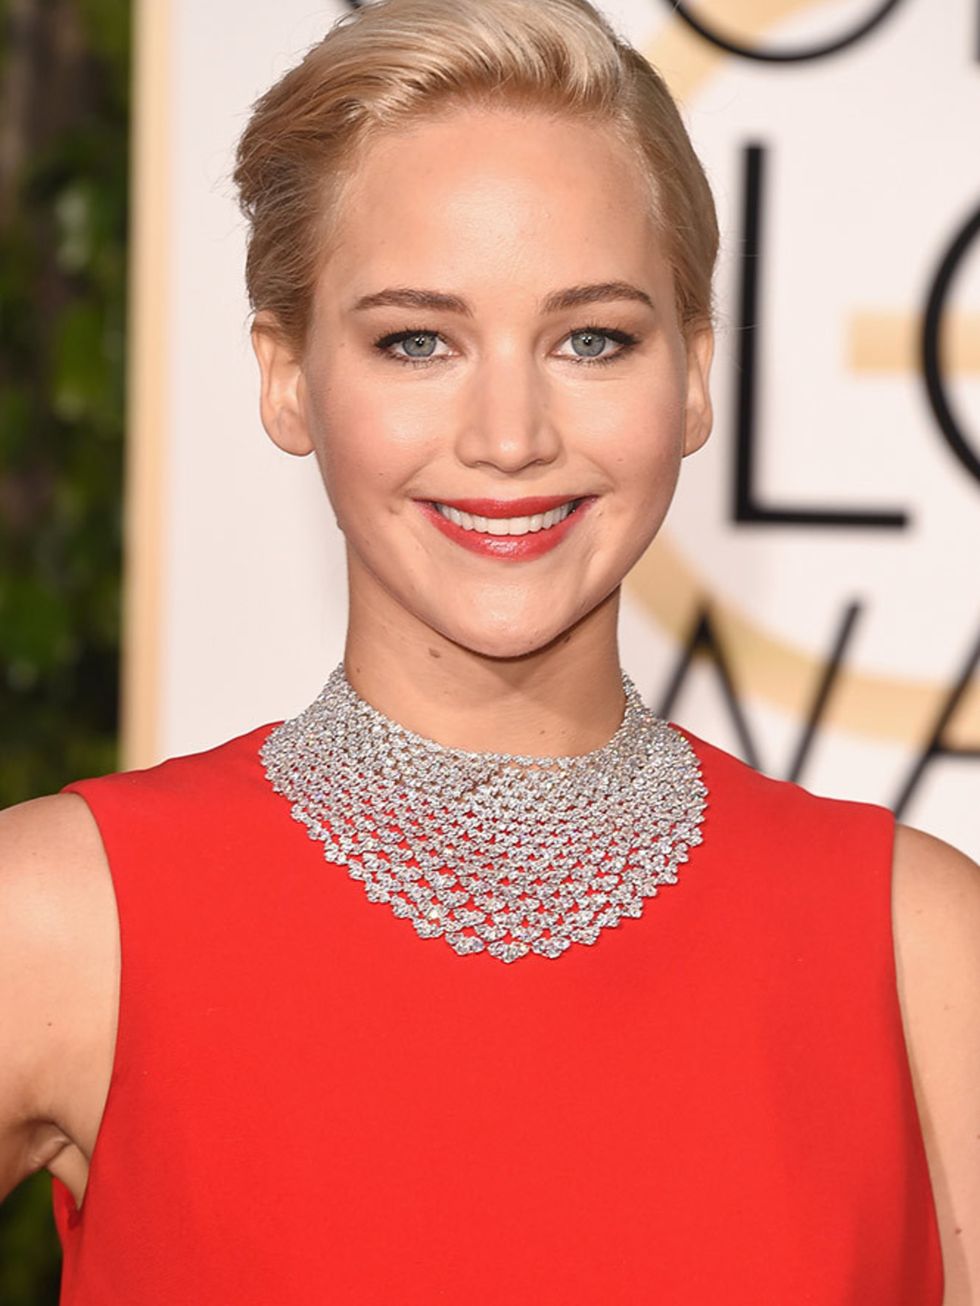 <p>Jennifer Lawrence, n<span style="line-height:1.6">ominated for Best actress in Joy</span></p>